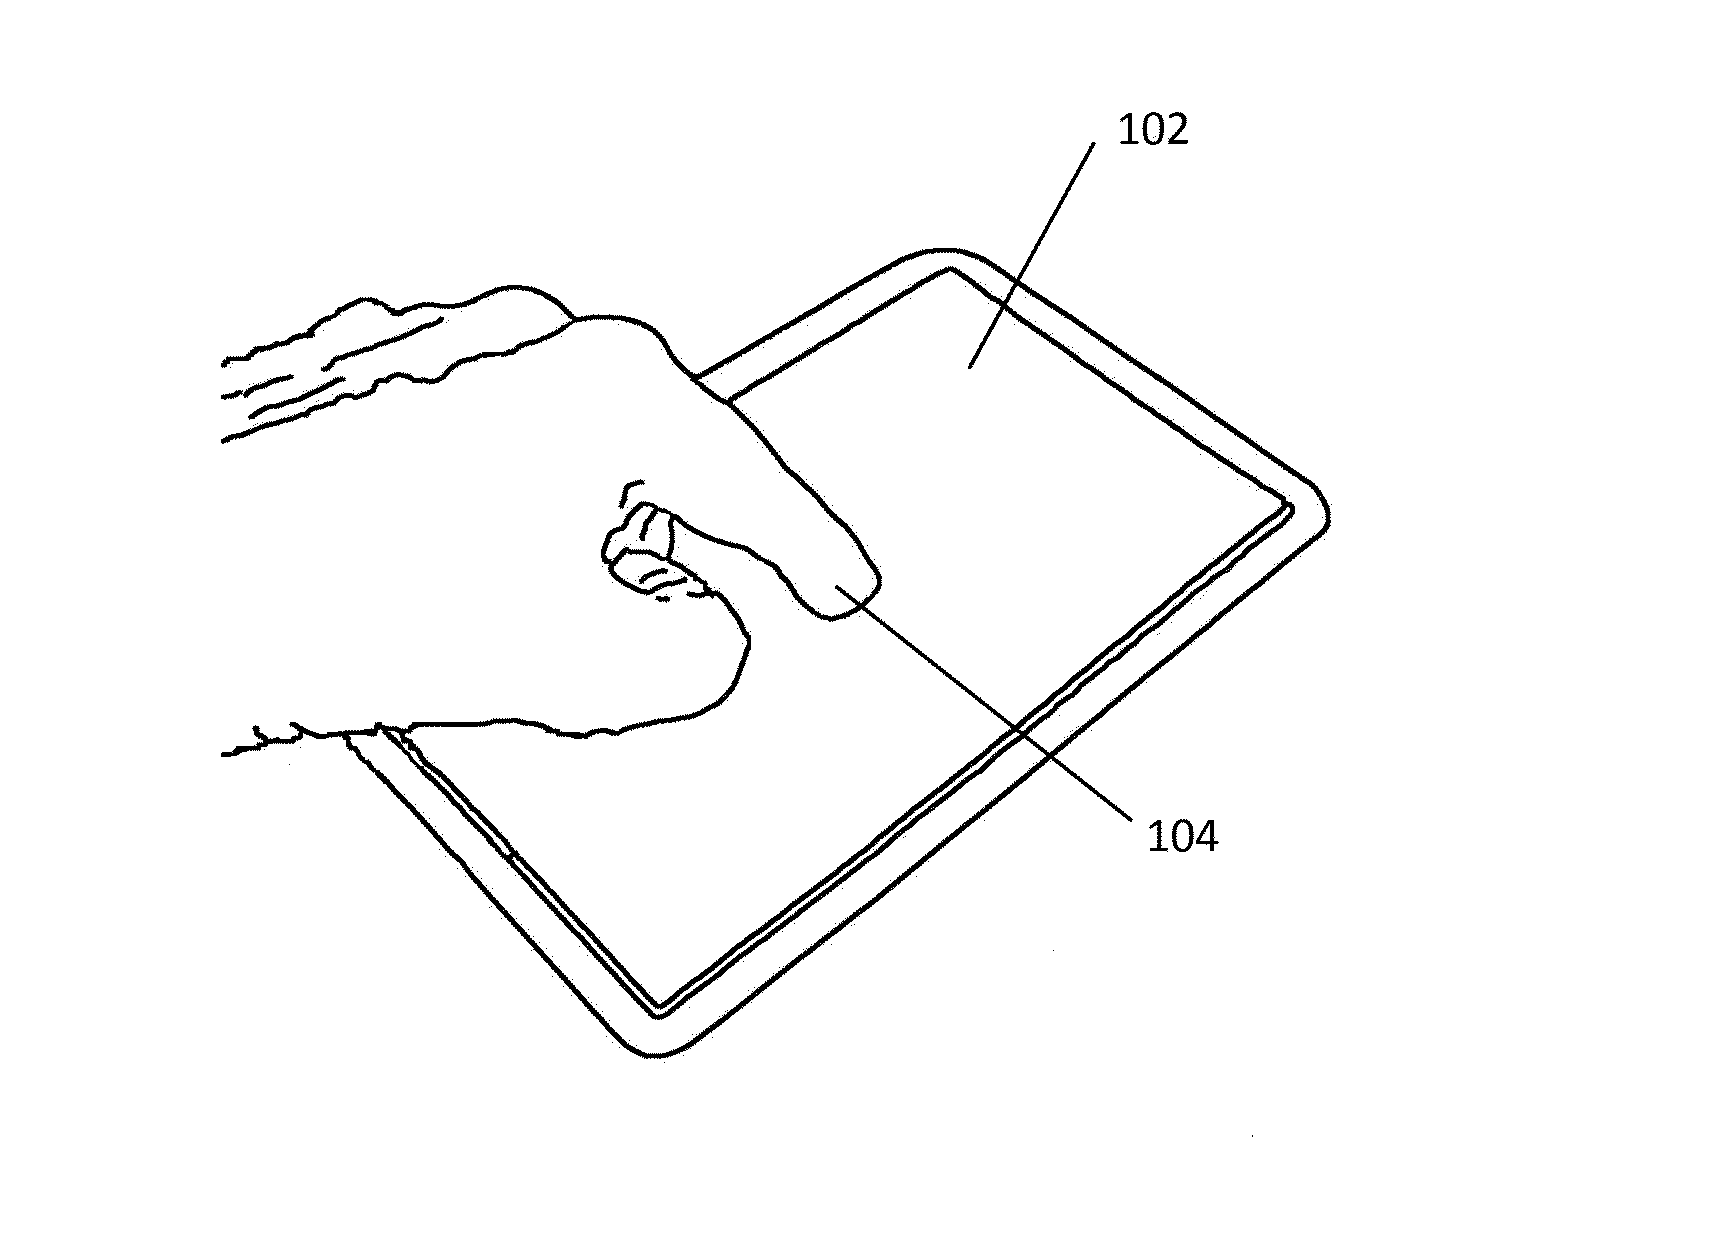 Definition and use of node-based points, lines and routes on touch screen devices